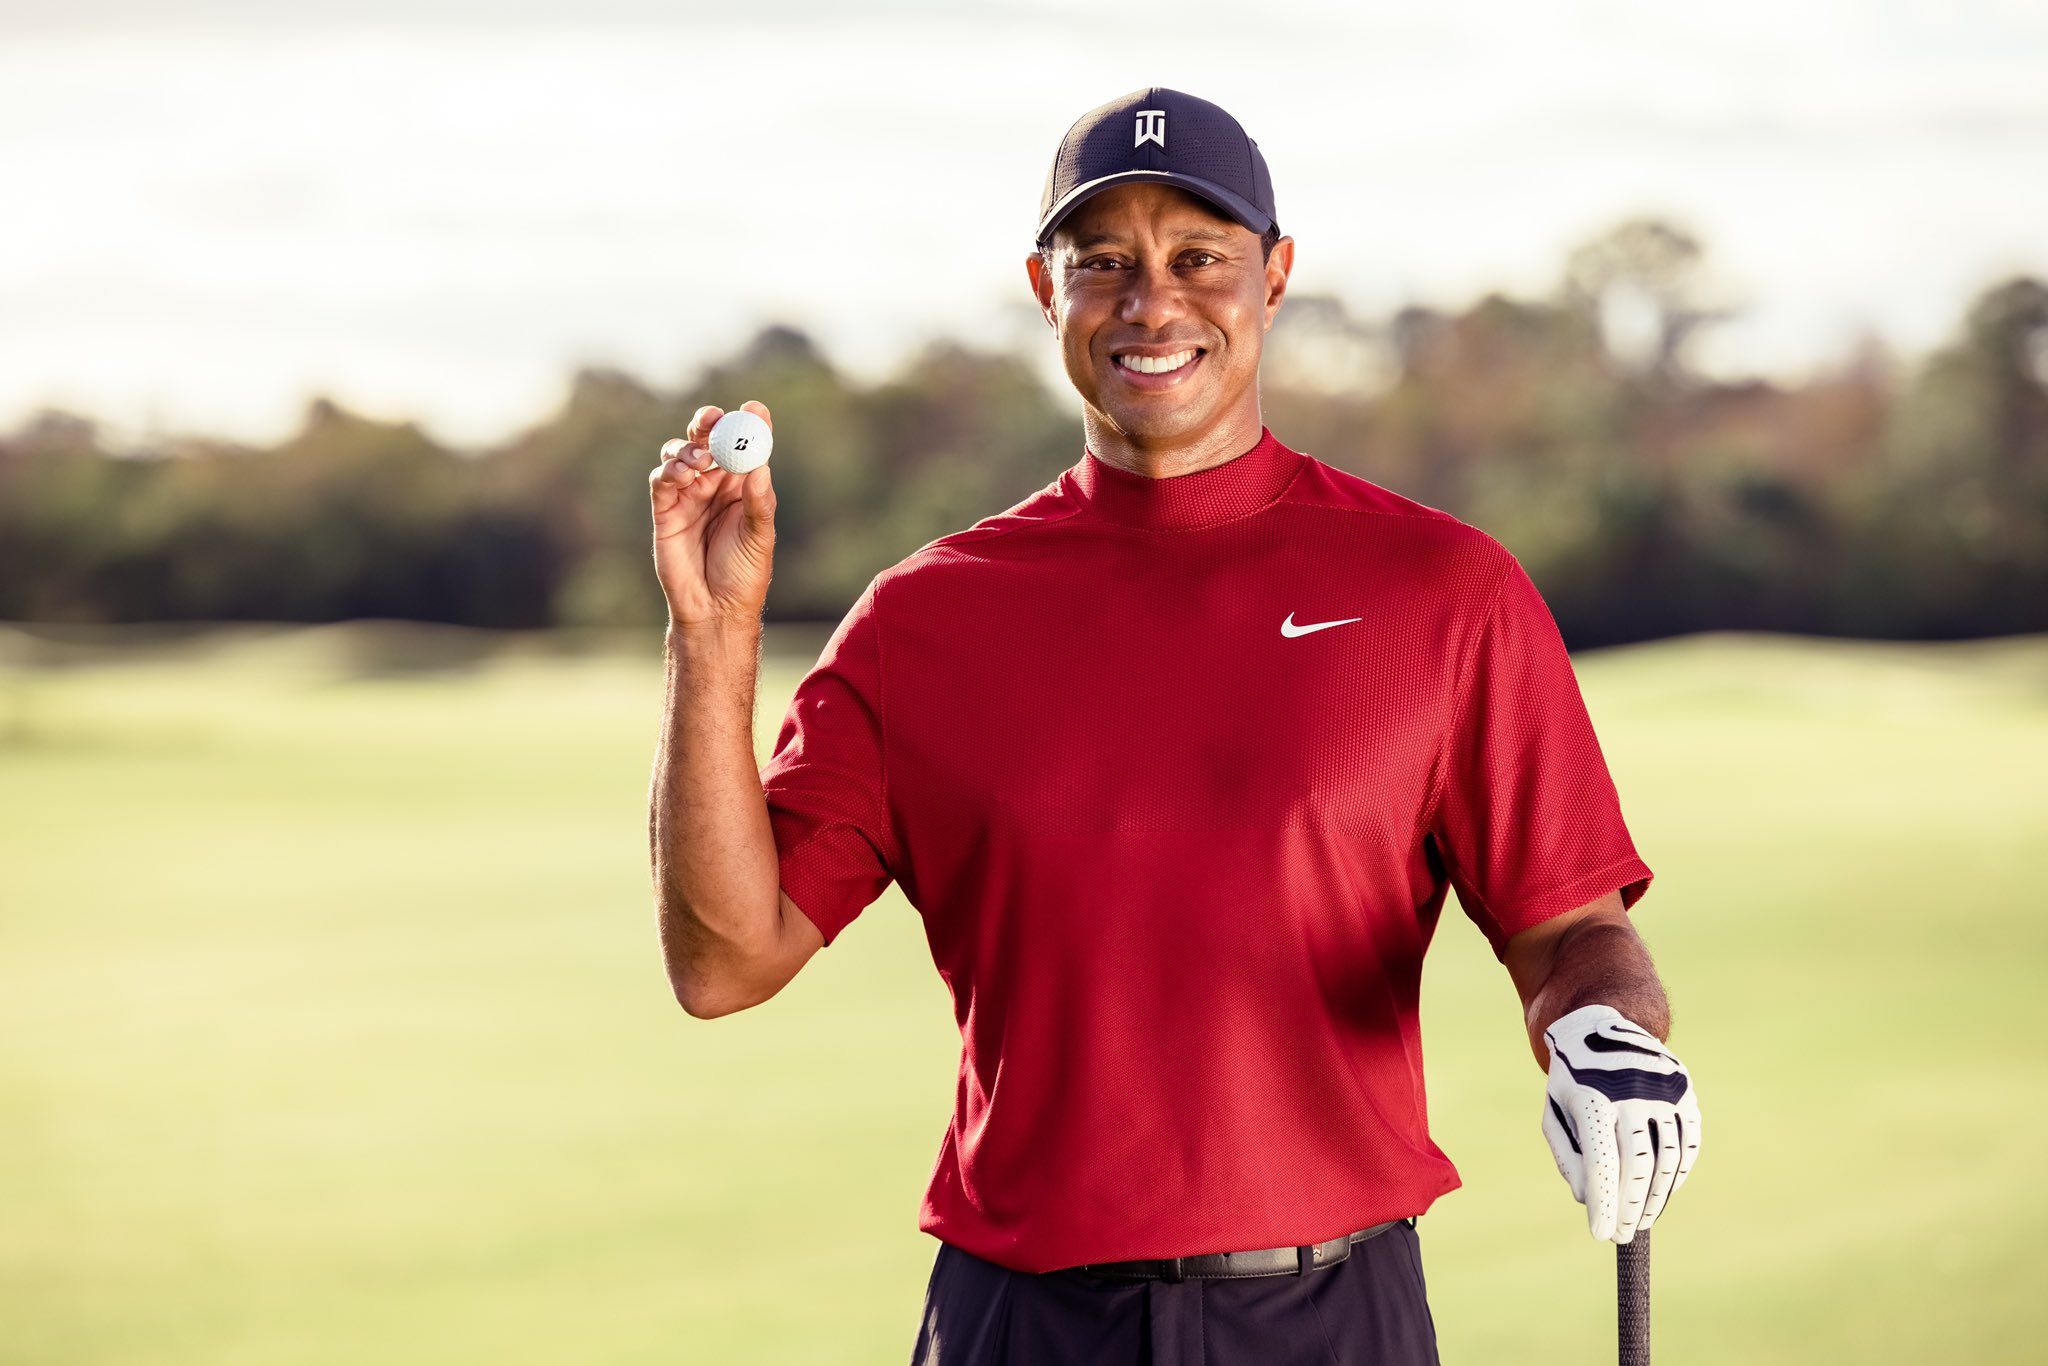 A look at US golfer Tiger Wood’s achievements